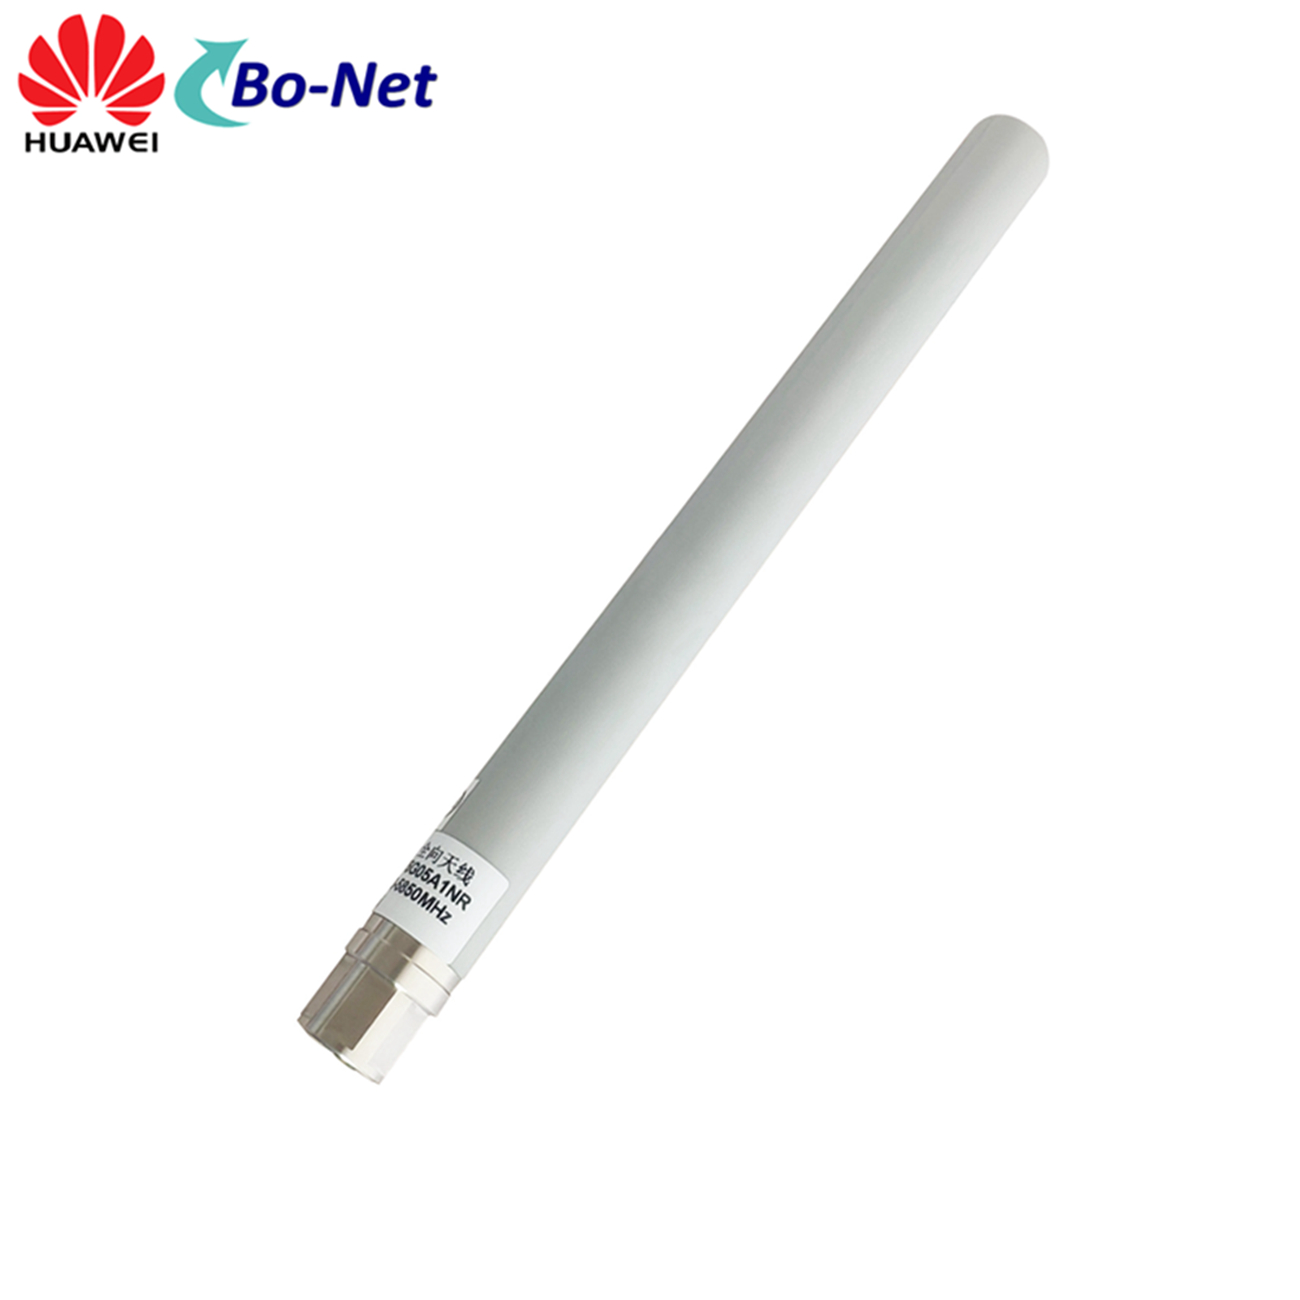 Huawei ANT5G05A1NR 5G Outdoor AP Dual-Frequency Omnidirectional Antenna